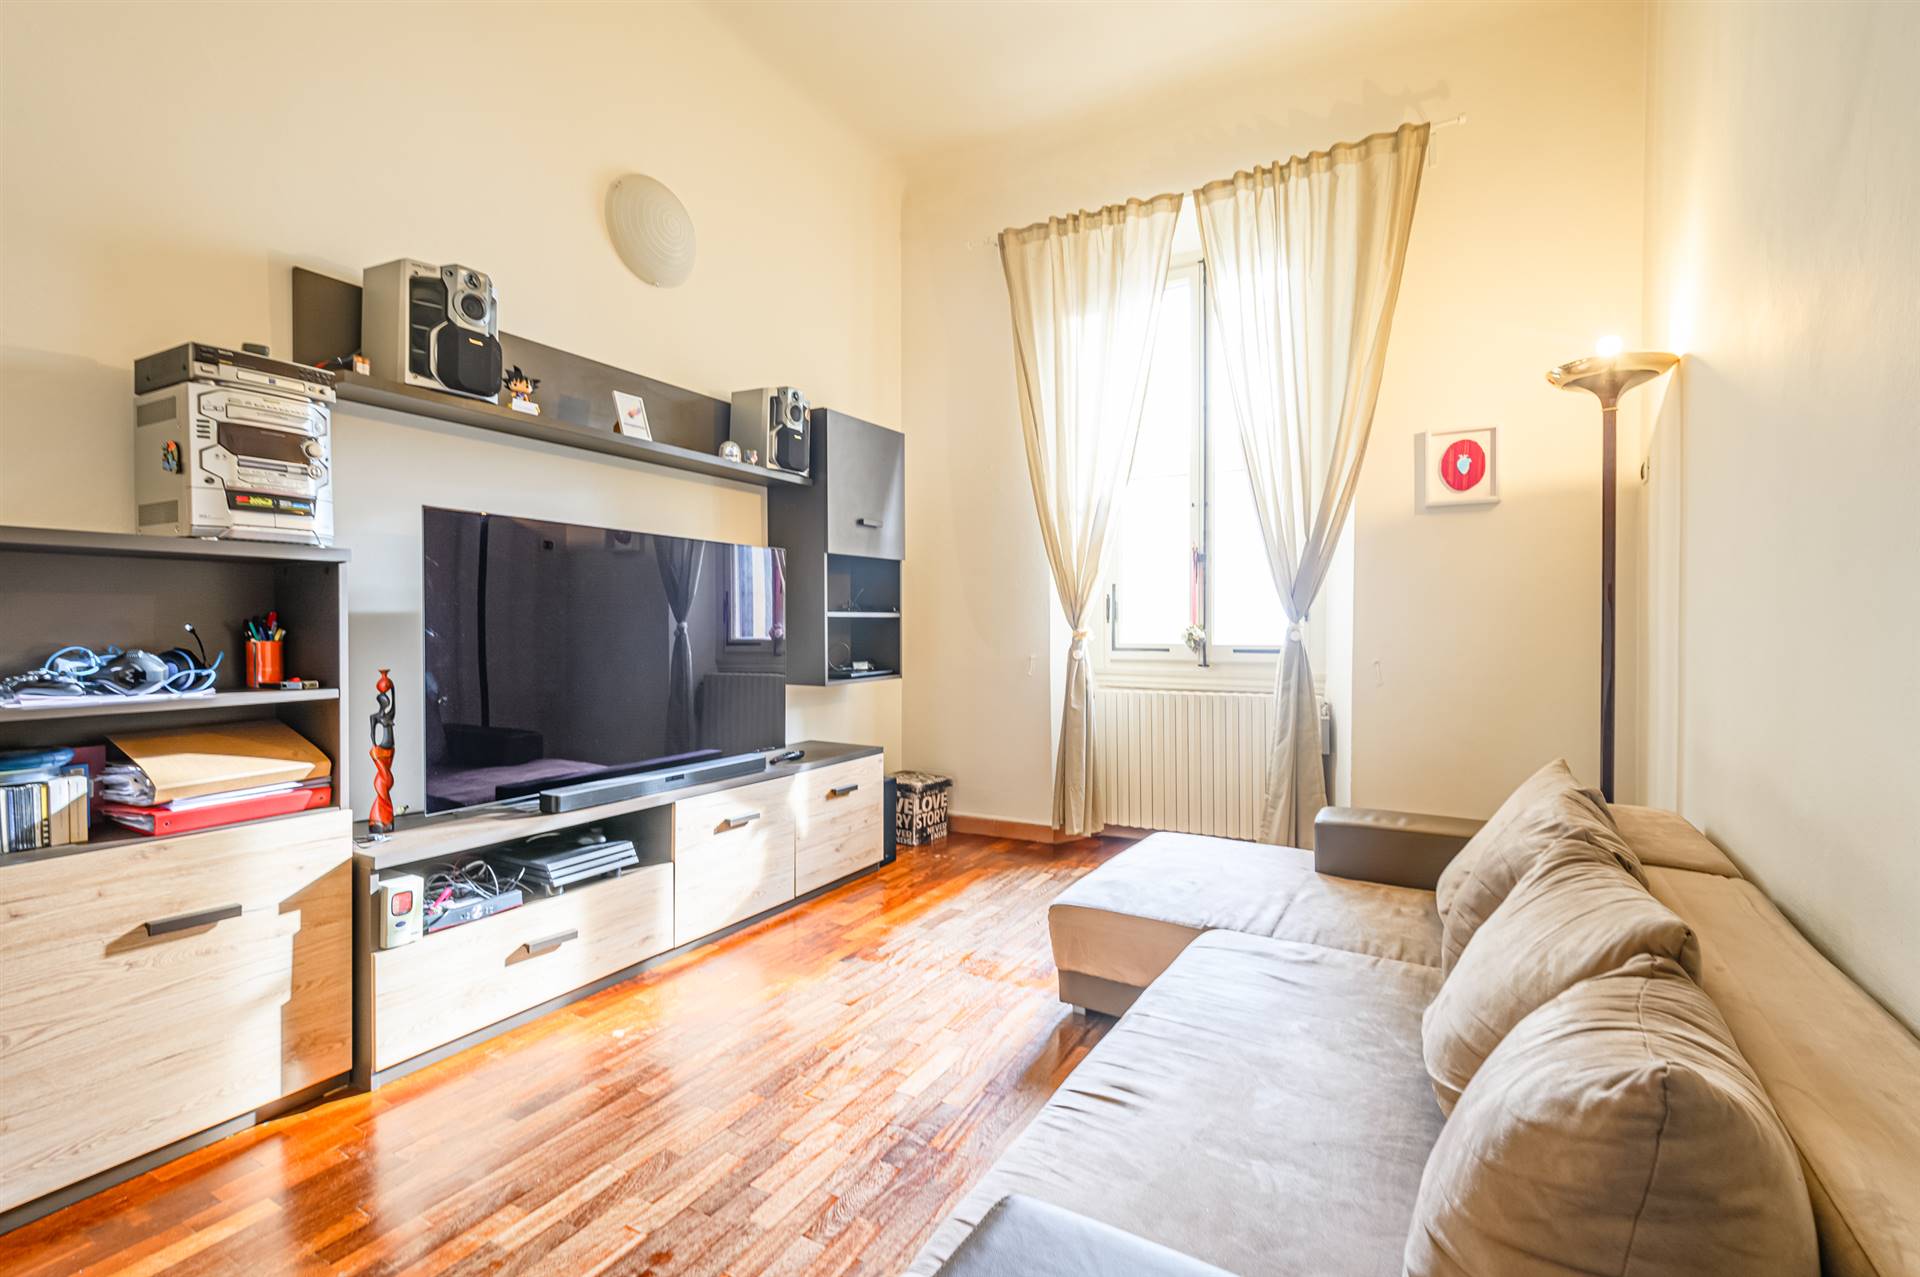 SAN FREDIANO, FIRENZE, Apartment for sale of 90 Sq. mt., Good condition, Heating Individual heating system, Energetic class: G, Epi: 175 kwh/m2 year, 